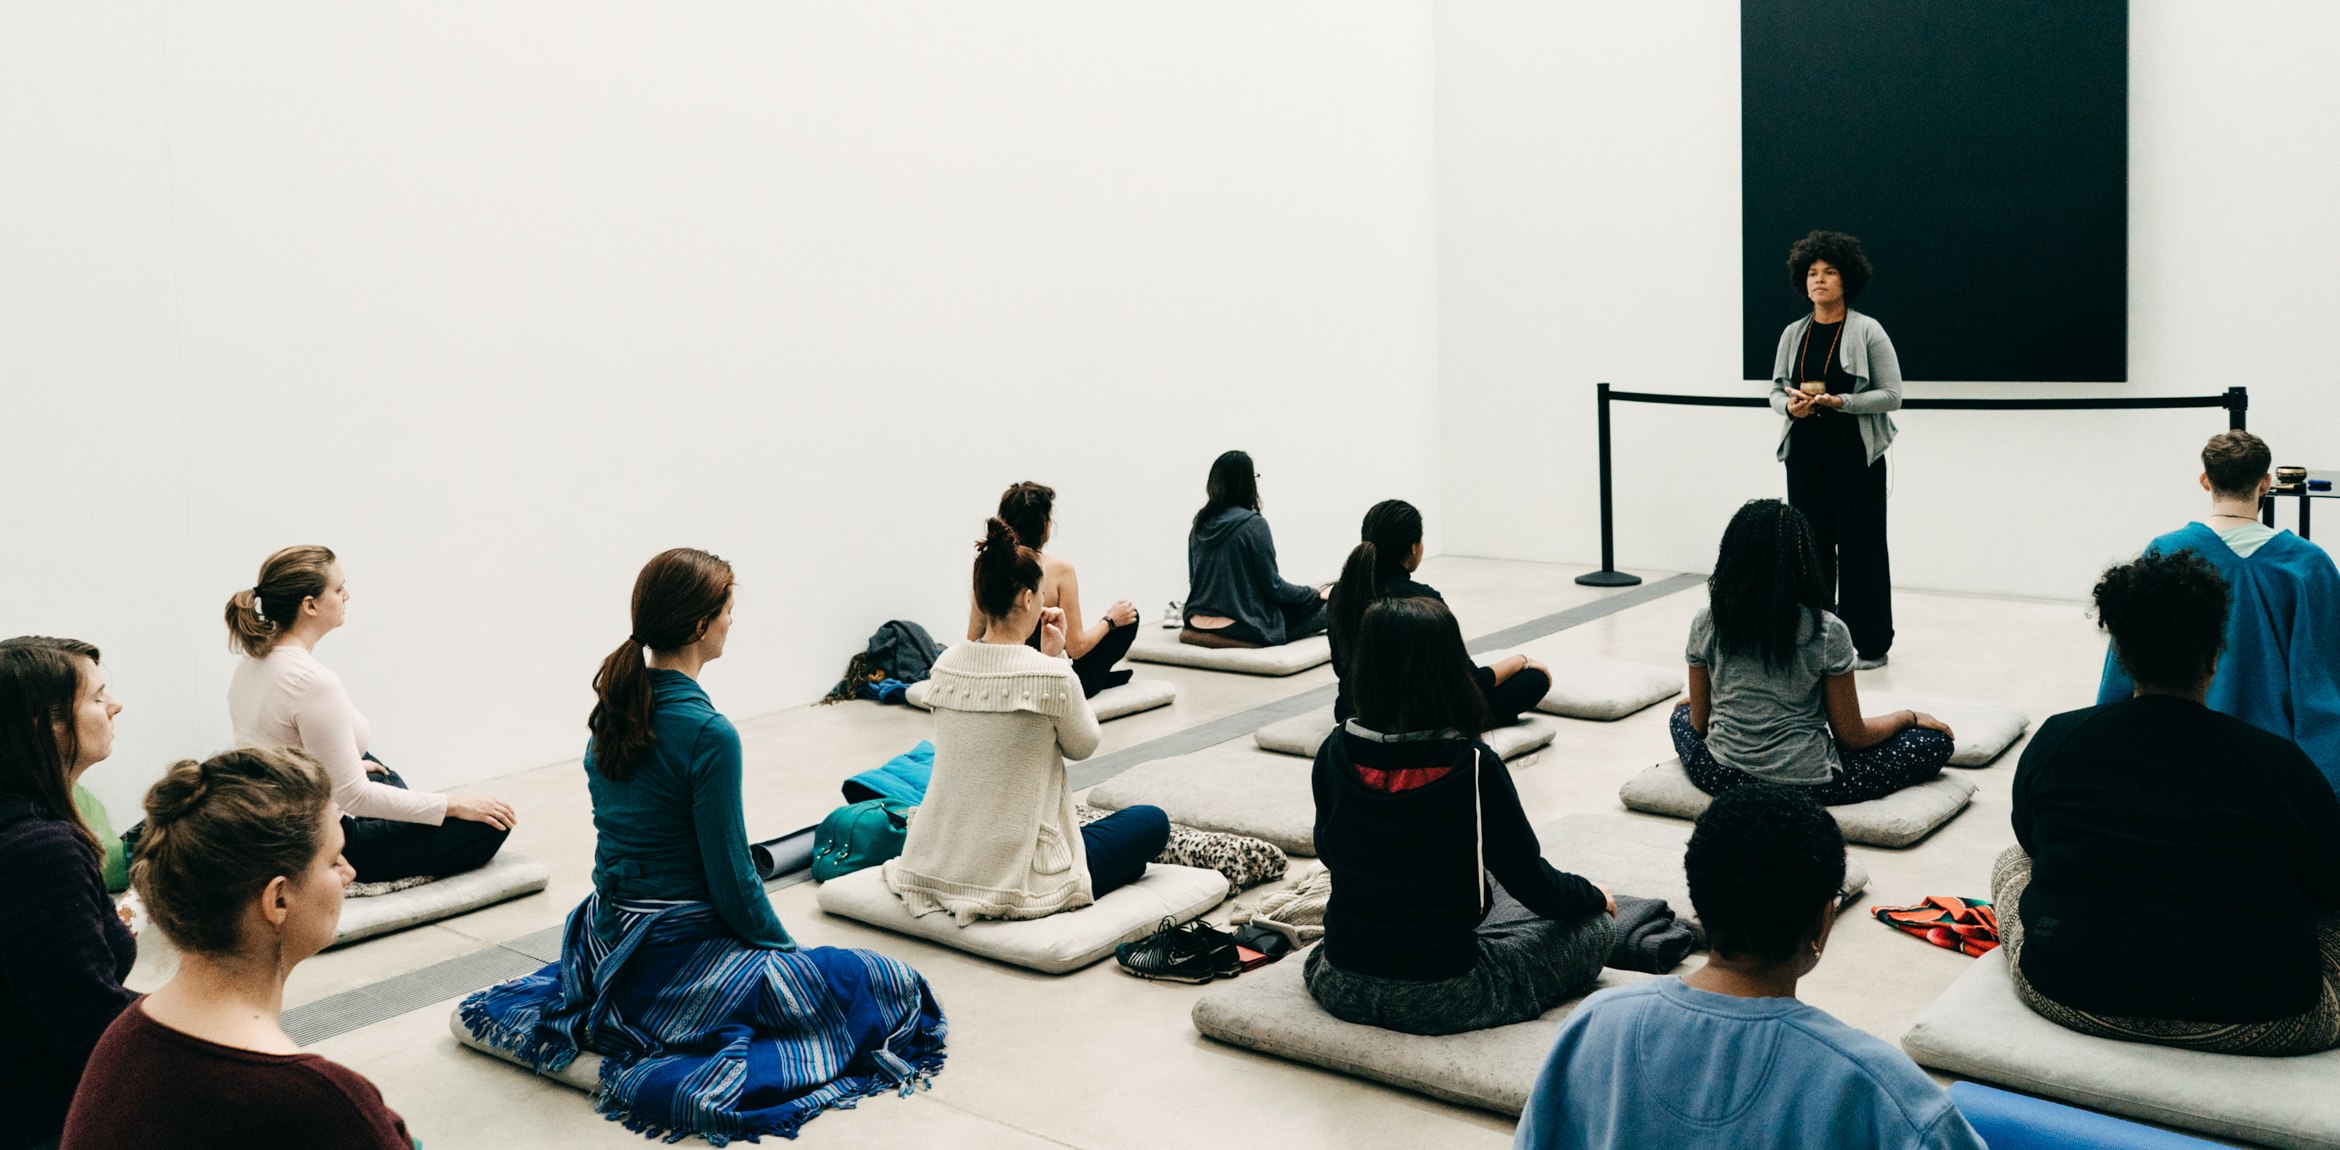 Simiya Sudduth leads a group in meditation in the Lower Main Gallery.